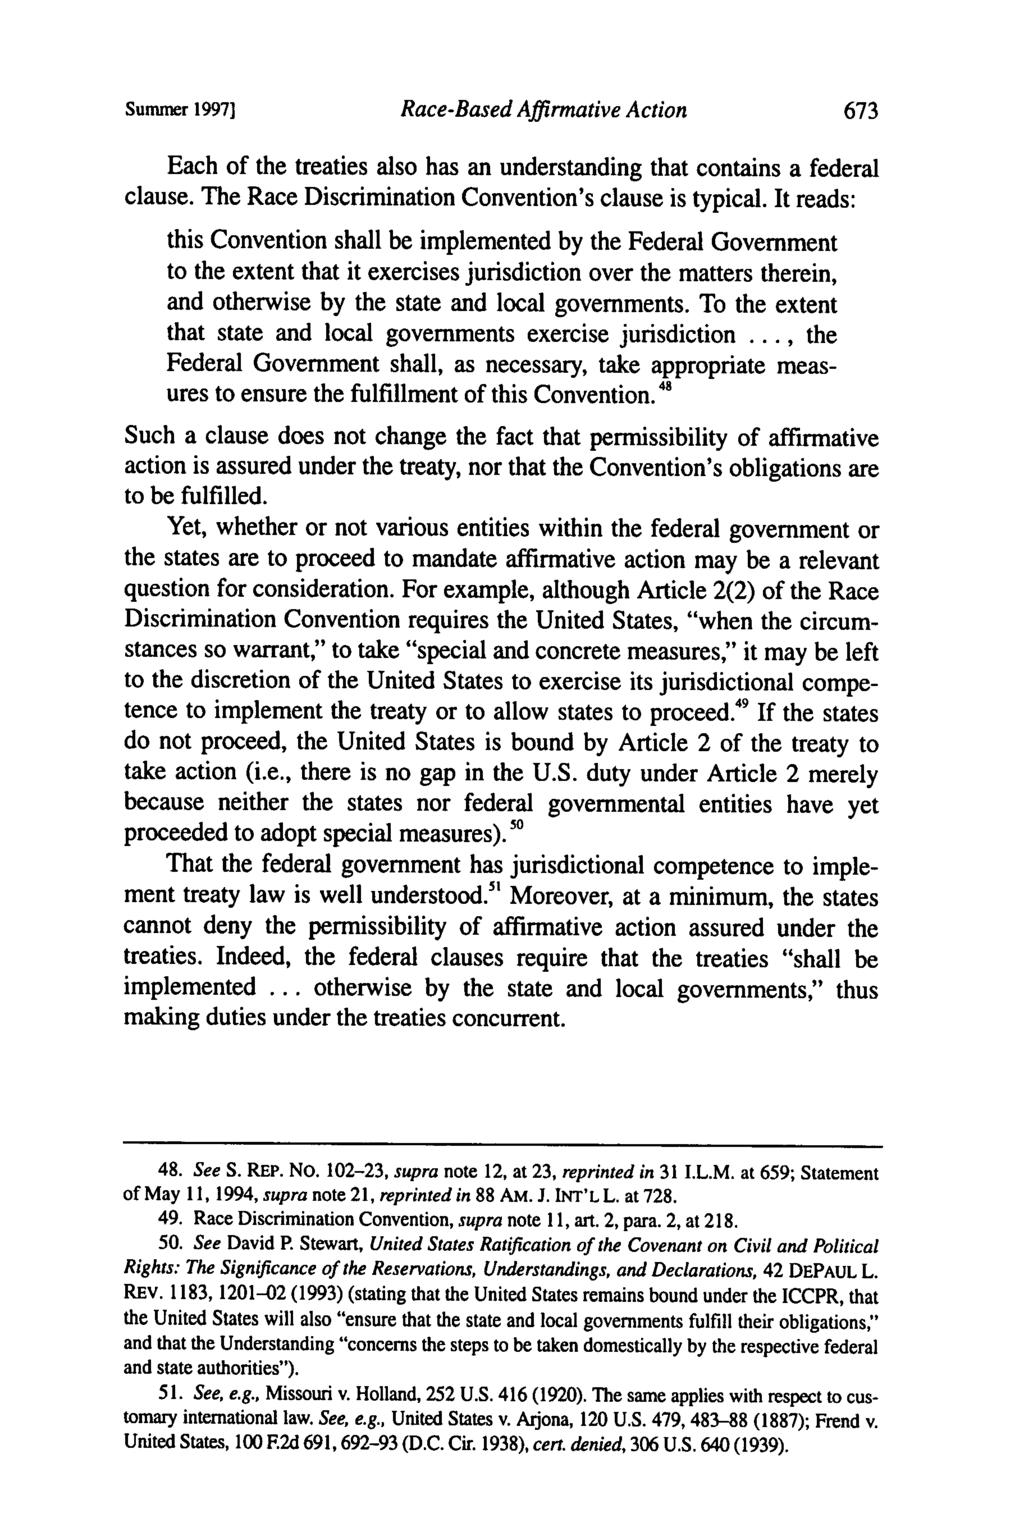 Summer 1997] Race-Based Affirmative Action Each of the treaties also has an understanding that contains a federal clause. The Race Discrimination Convention's clause is typical.